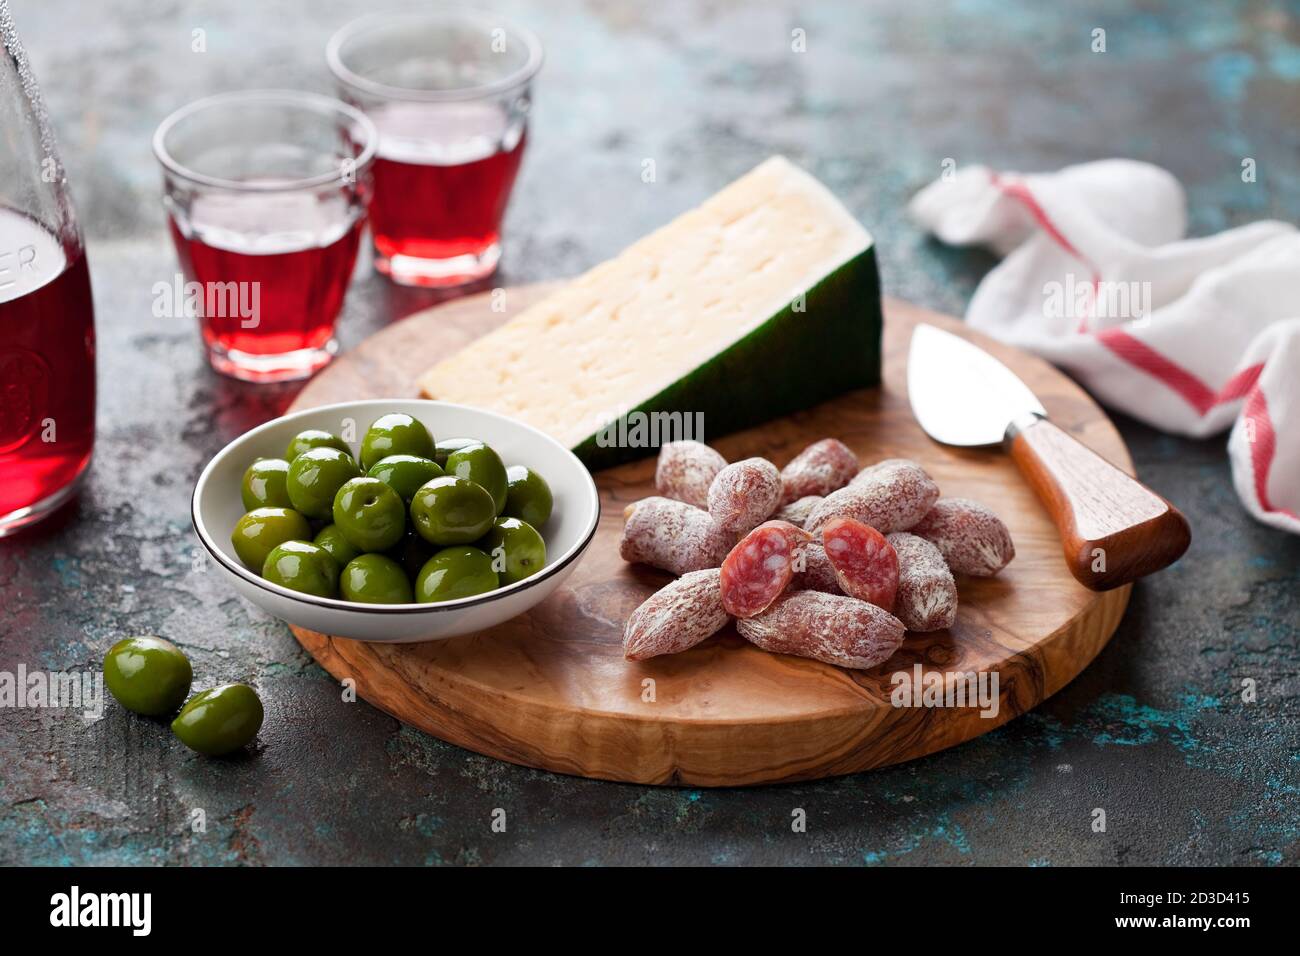 Antipasto Platter. Fuet mini sausages, green olives and cheese on wooden cutting board, selective focus Stock Photo